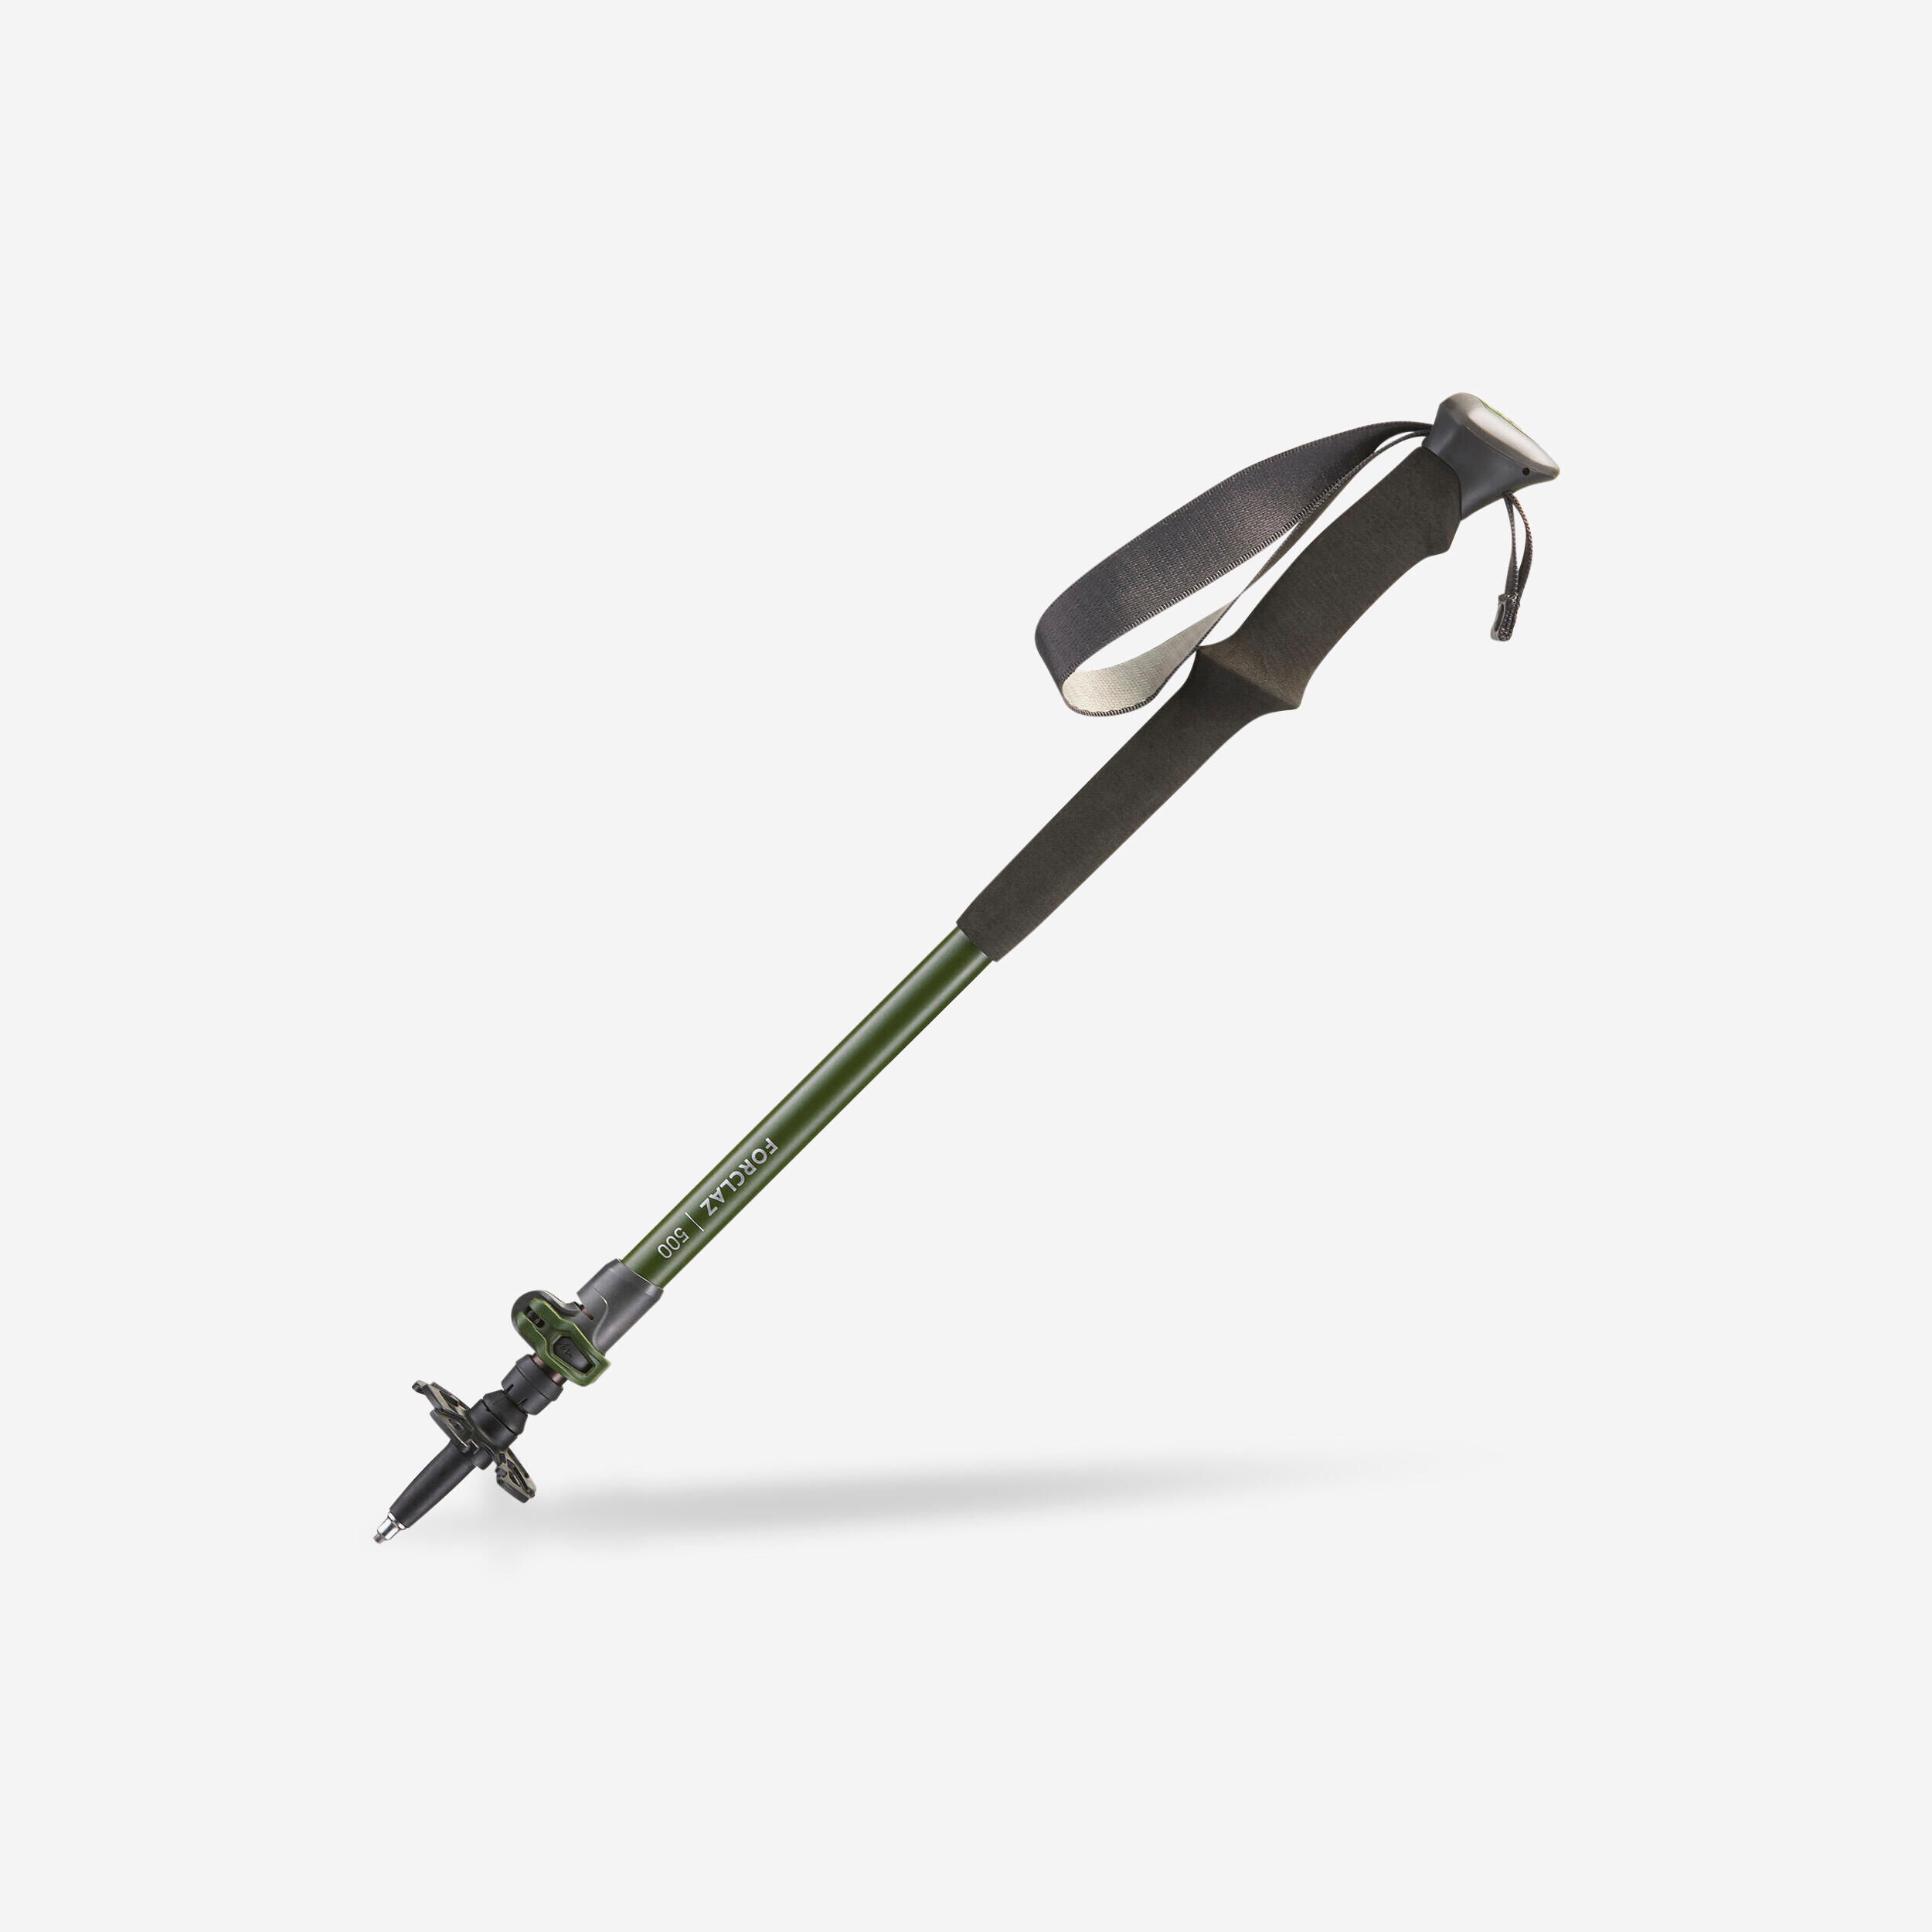 FORCLAZ 1 Hiking Pole with quick and precise adjustment - MT500 Green